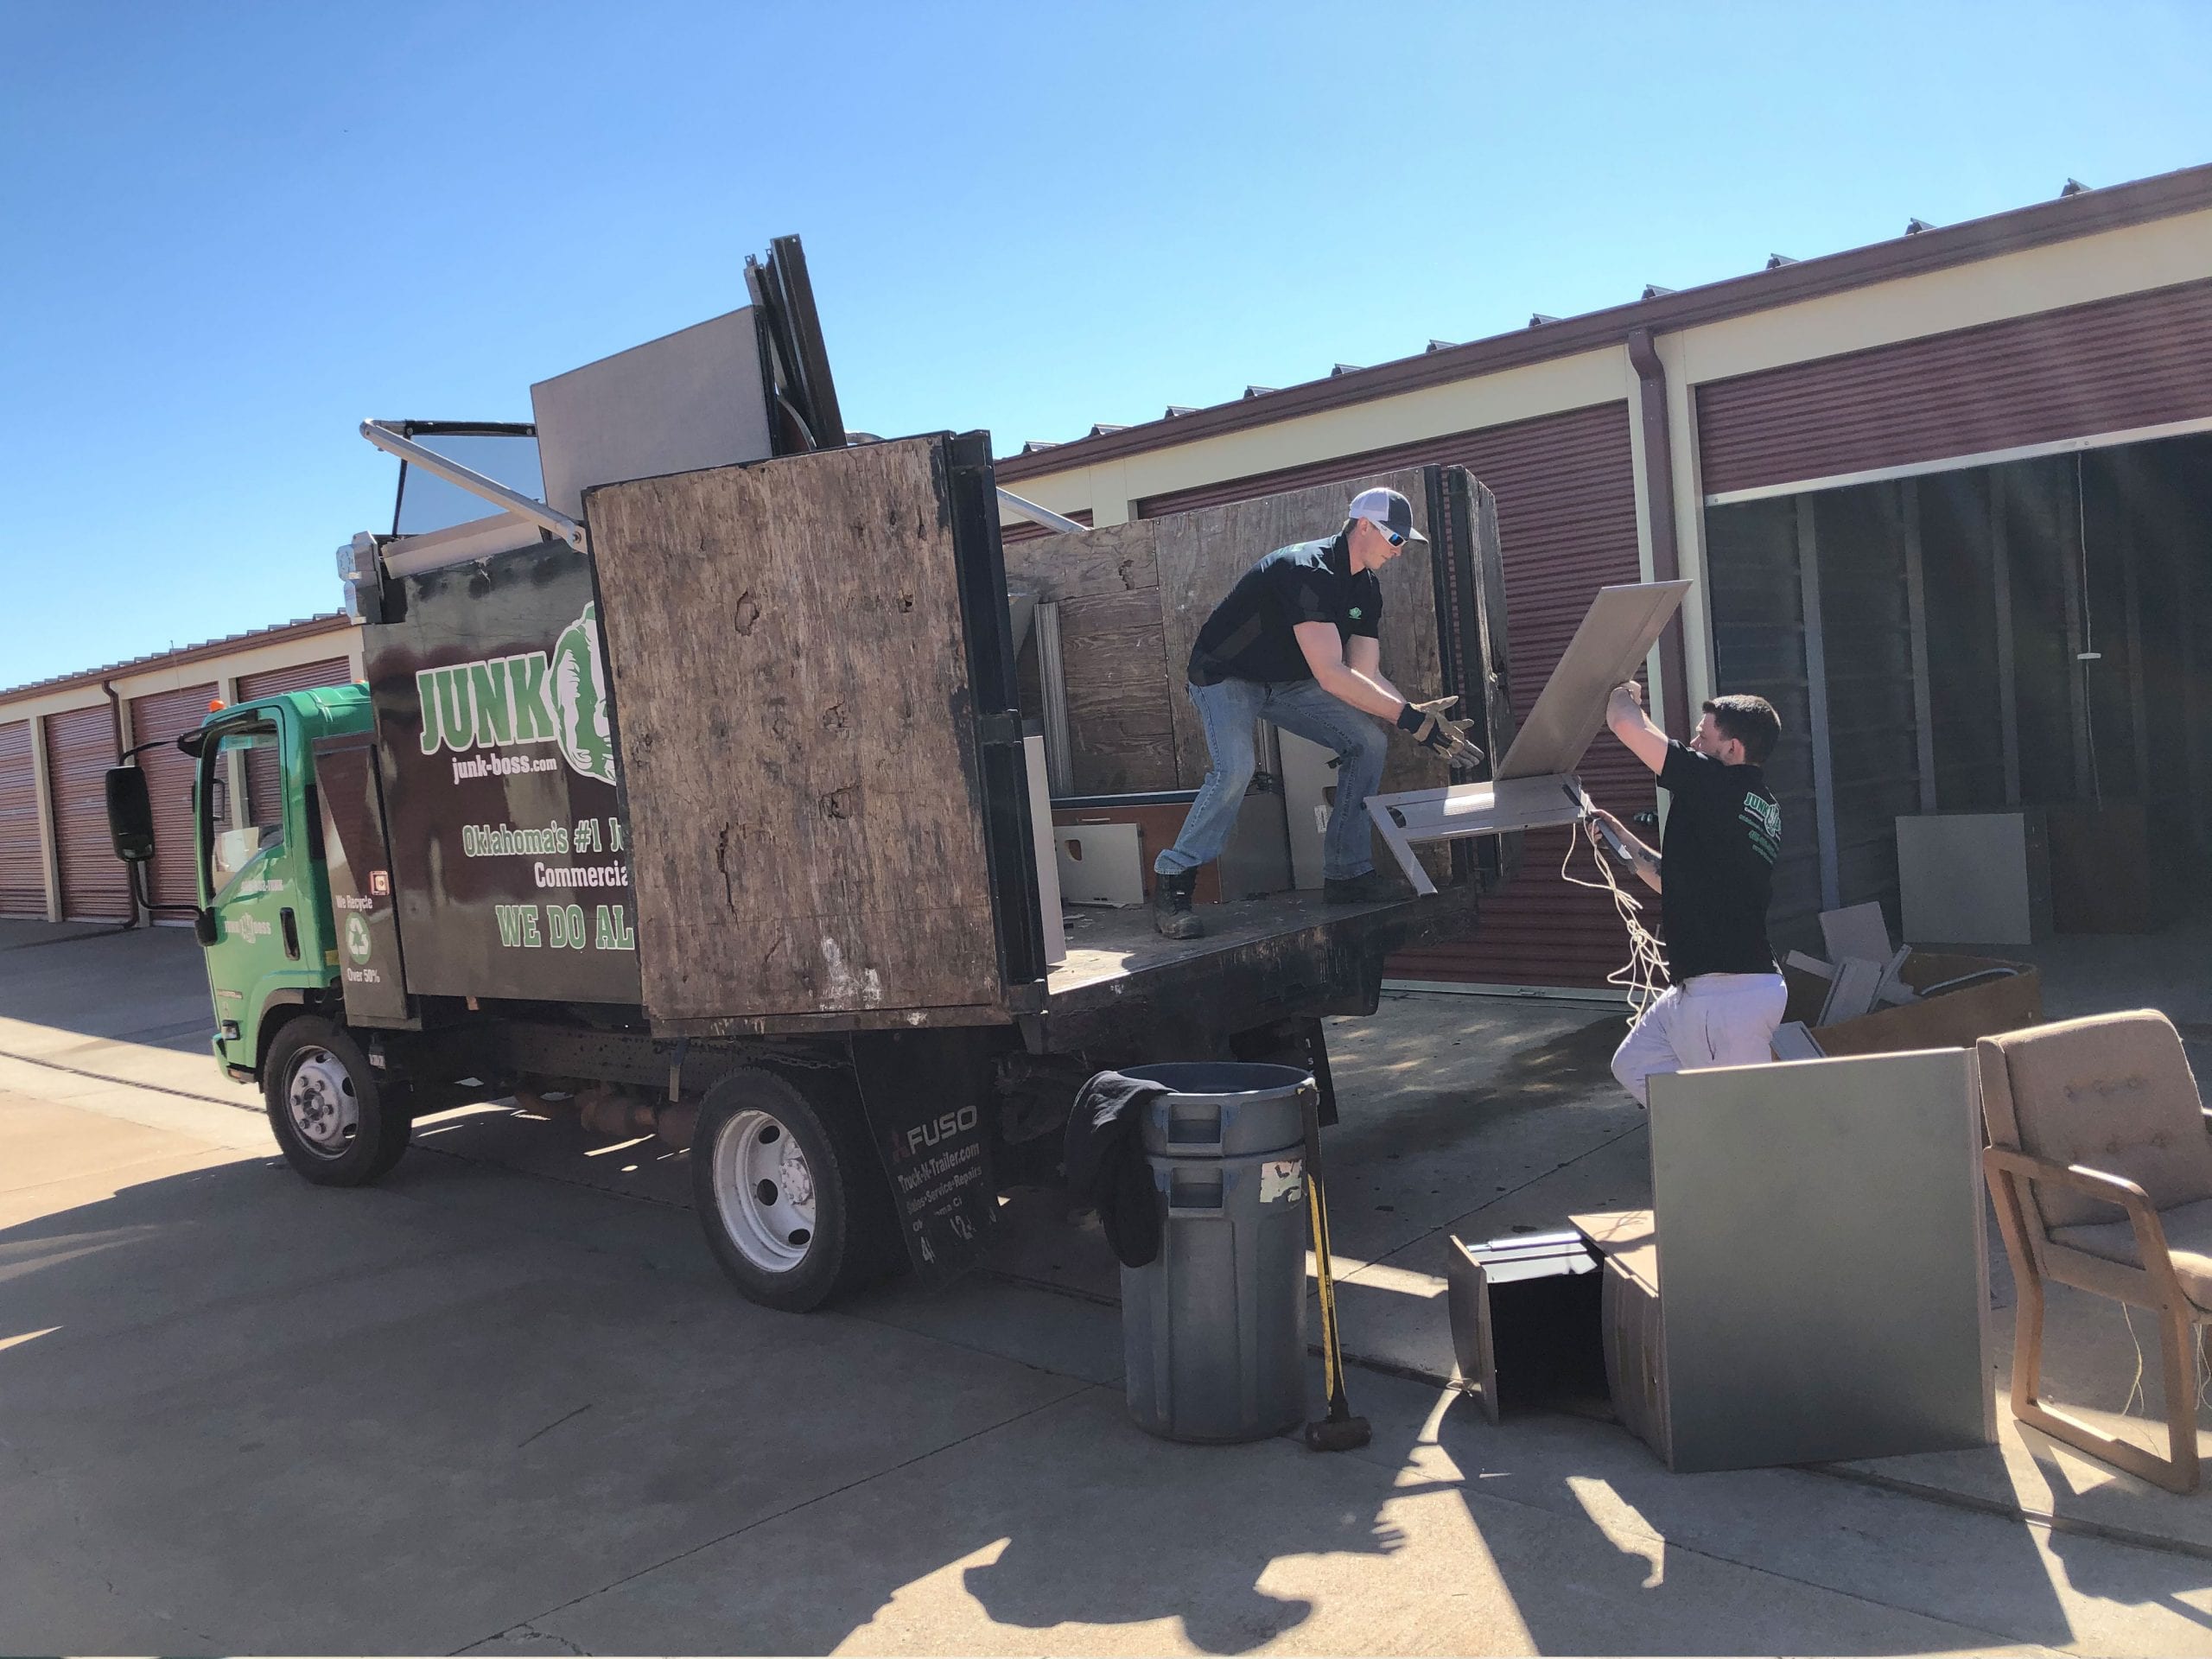 Contact Junk Boss For The Very Best Junk Removal Service In Yukon, Ok